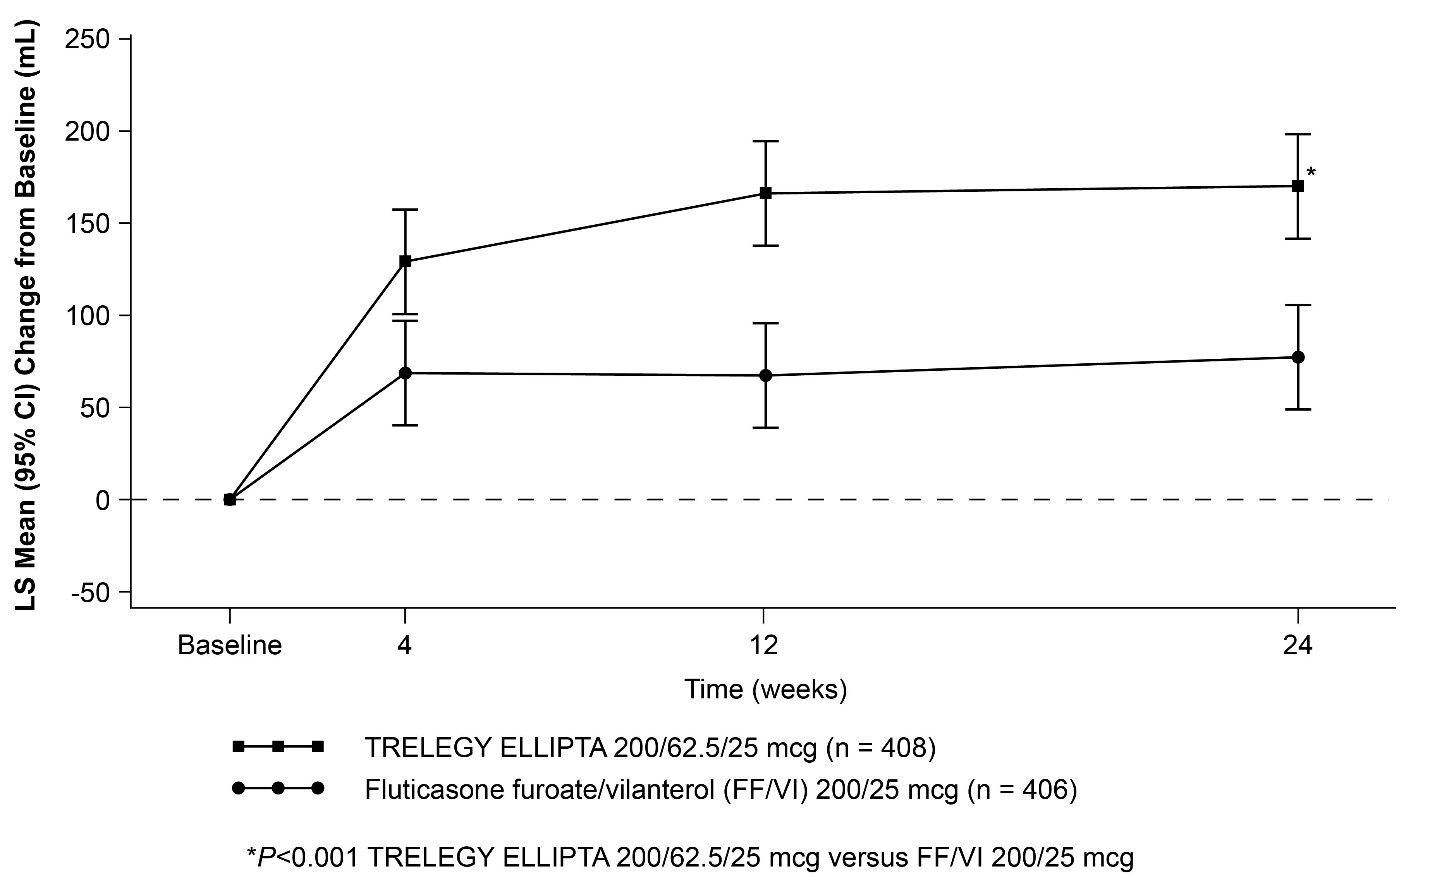 Figure 9. Least Squares Mean Change from Baseline in Trough FEV1 (mL) with TRELEGY ELLIPTA 200/62.5/25 mcg over 24 Weeks of Treatment